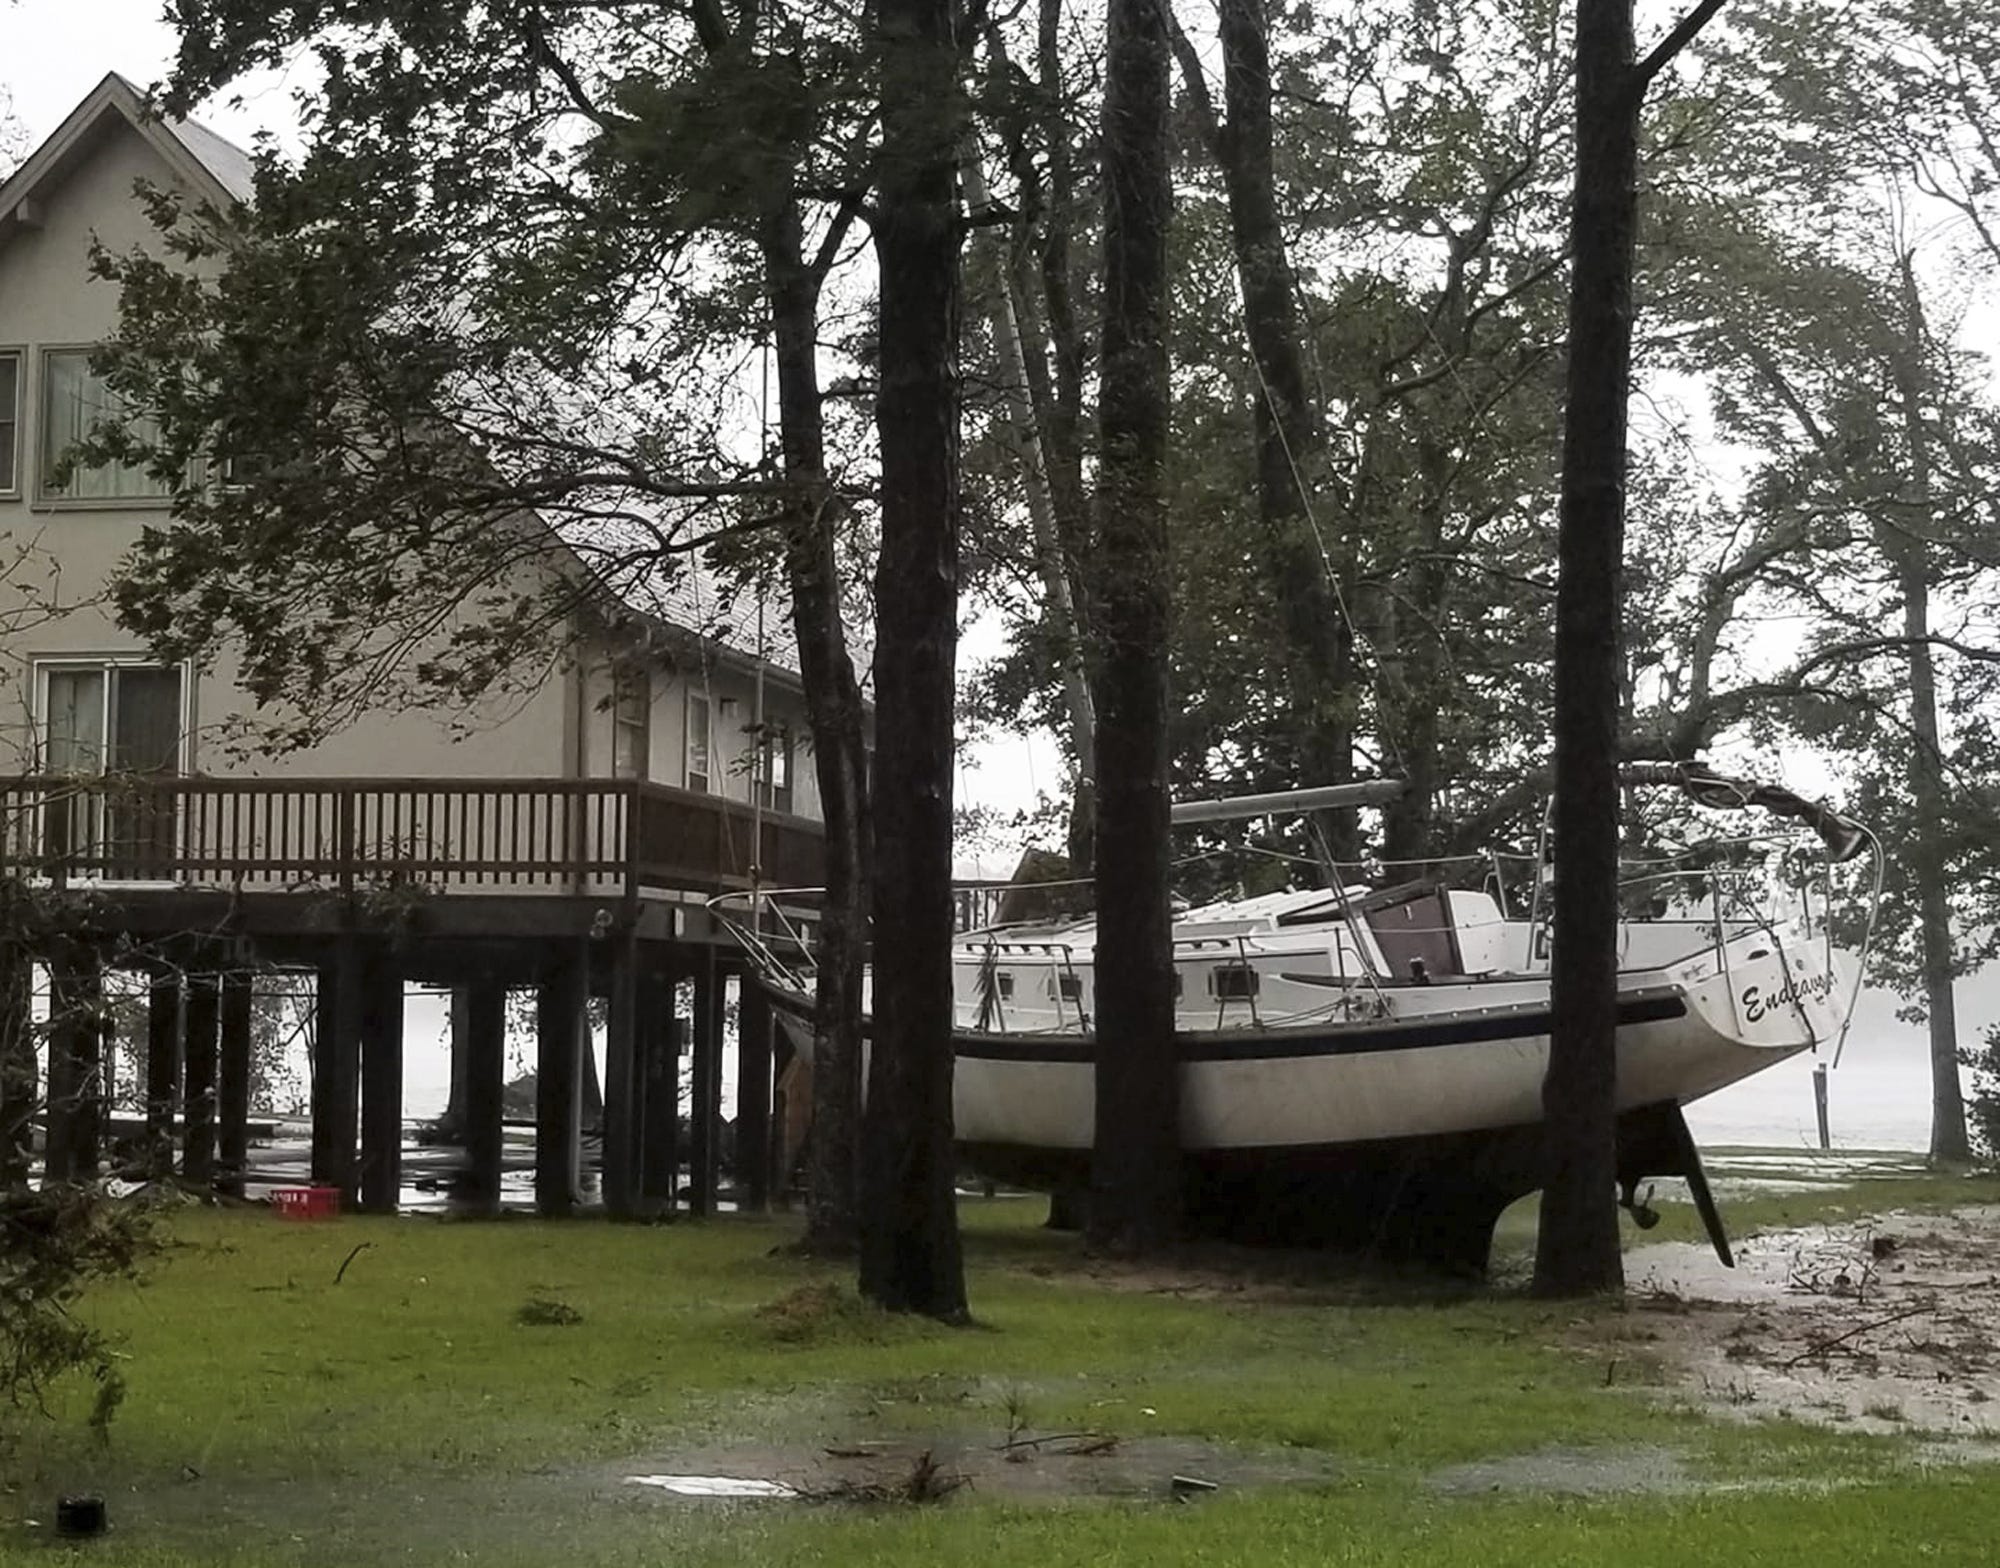 This photo provided by Angie Propst, shows a boat wedged in trees during Hurricane Florence in Oriental, N.C, one of nine incorporated municipalities in Pamlico County, Friday, Sept. 14, 2018.   (Angie Propst via AP)